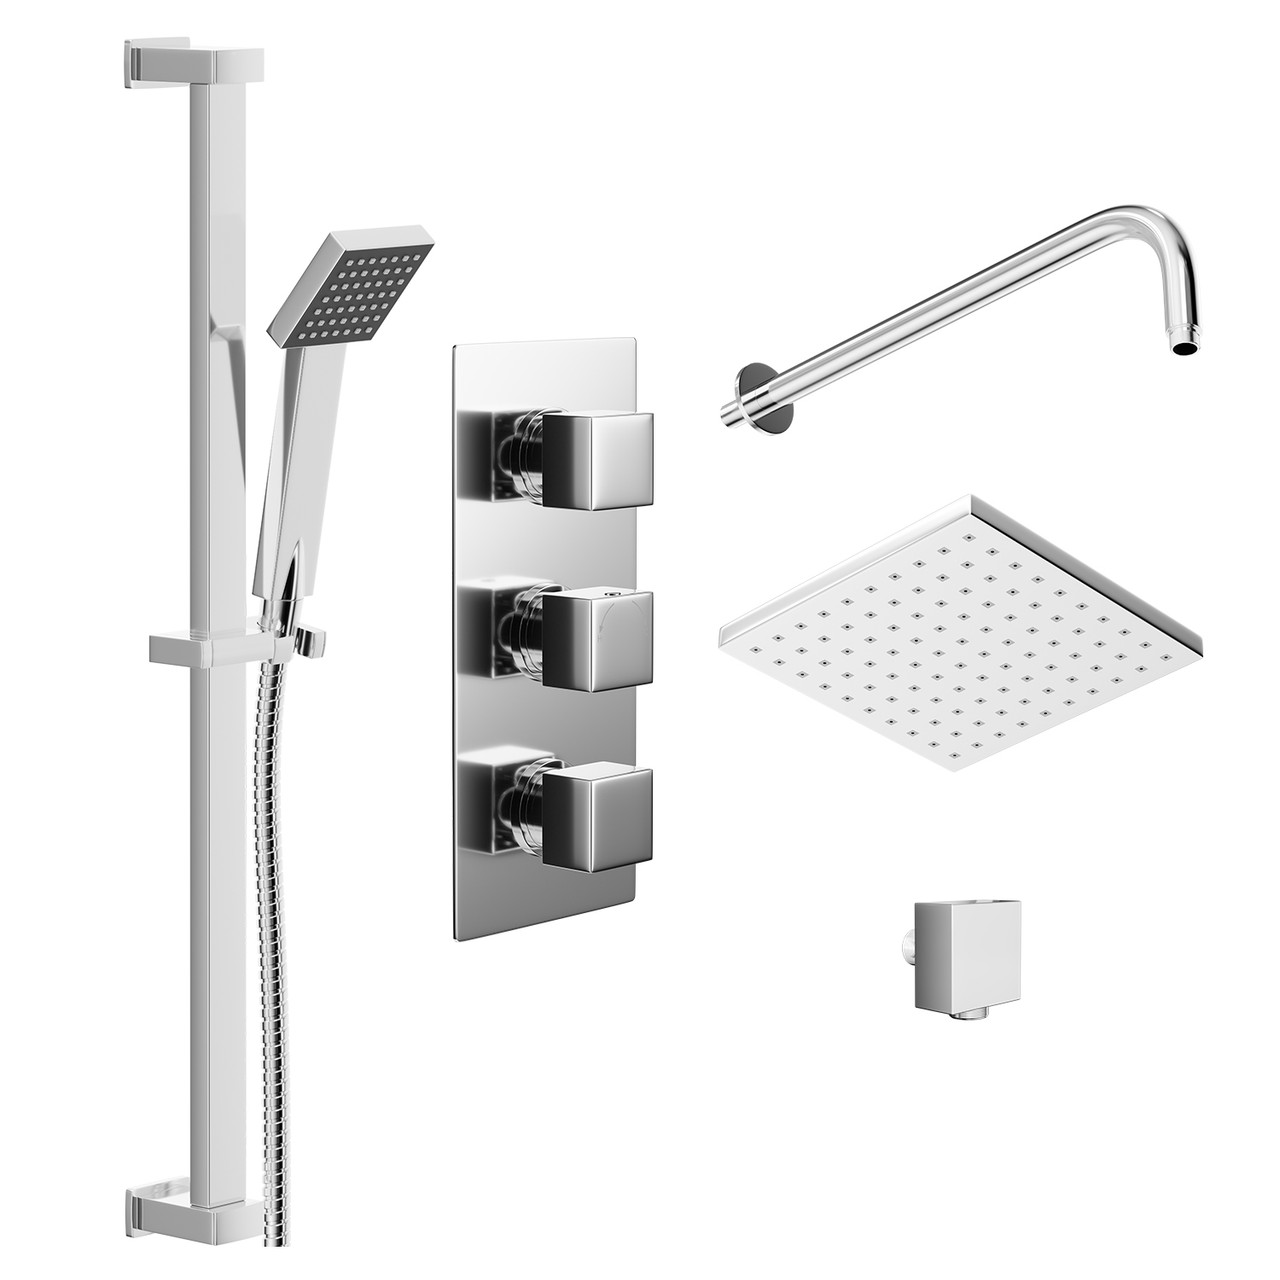 Cubix Polished Chrome Triple Thermostatic Valve Mixer Shower with Square Fixed Head and Thames Shower Slide Rail Kit